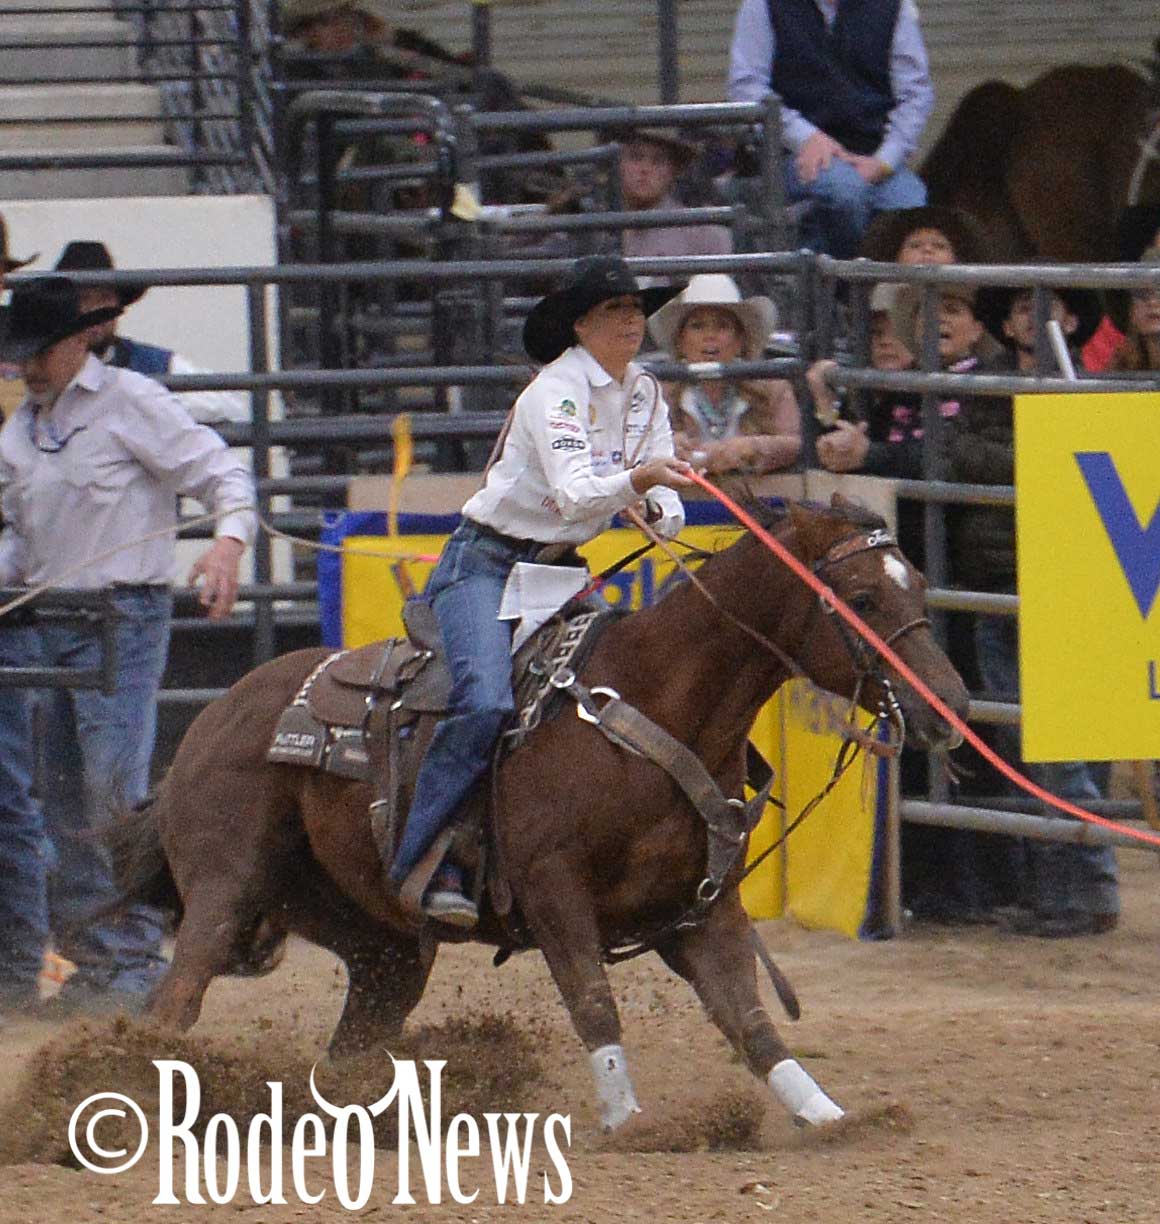 Champions crowned at Wrangler National Finals Breakaway Roping - The Rodeo  News